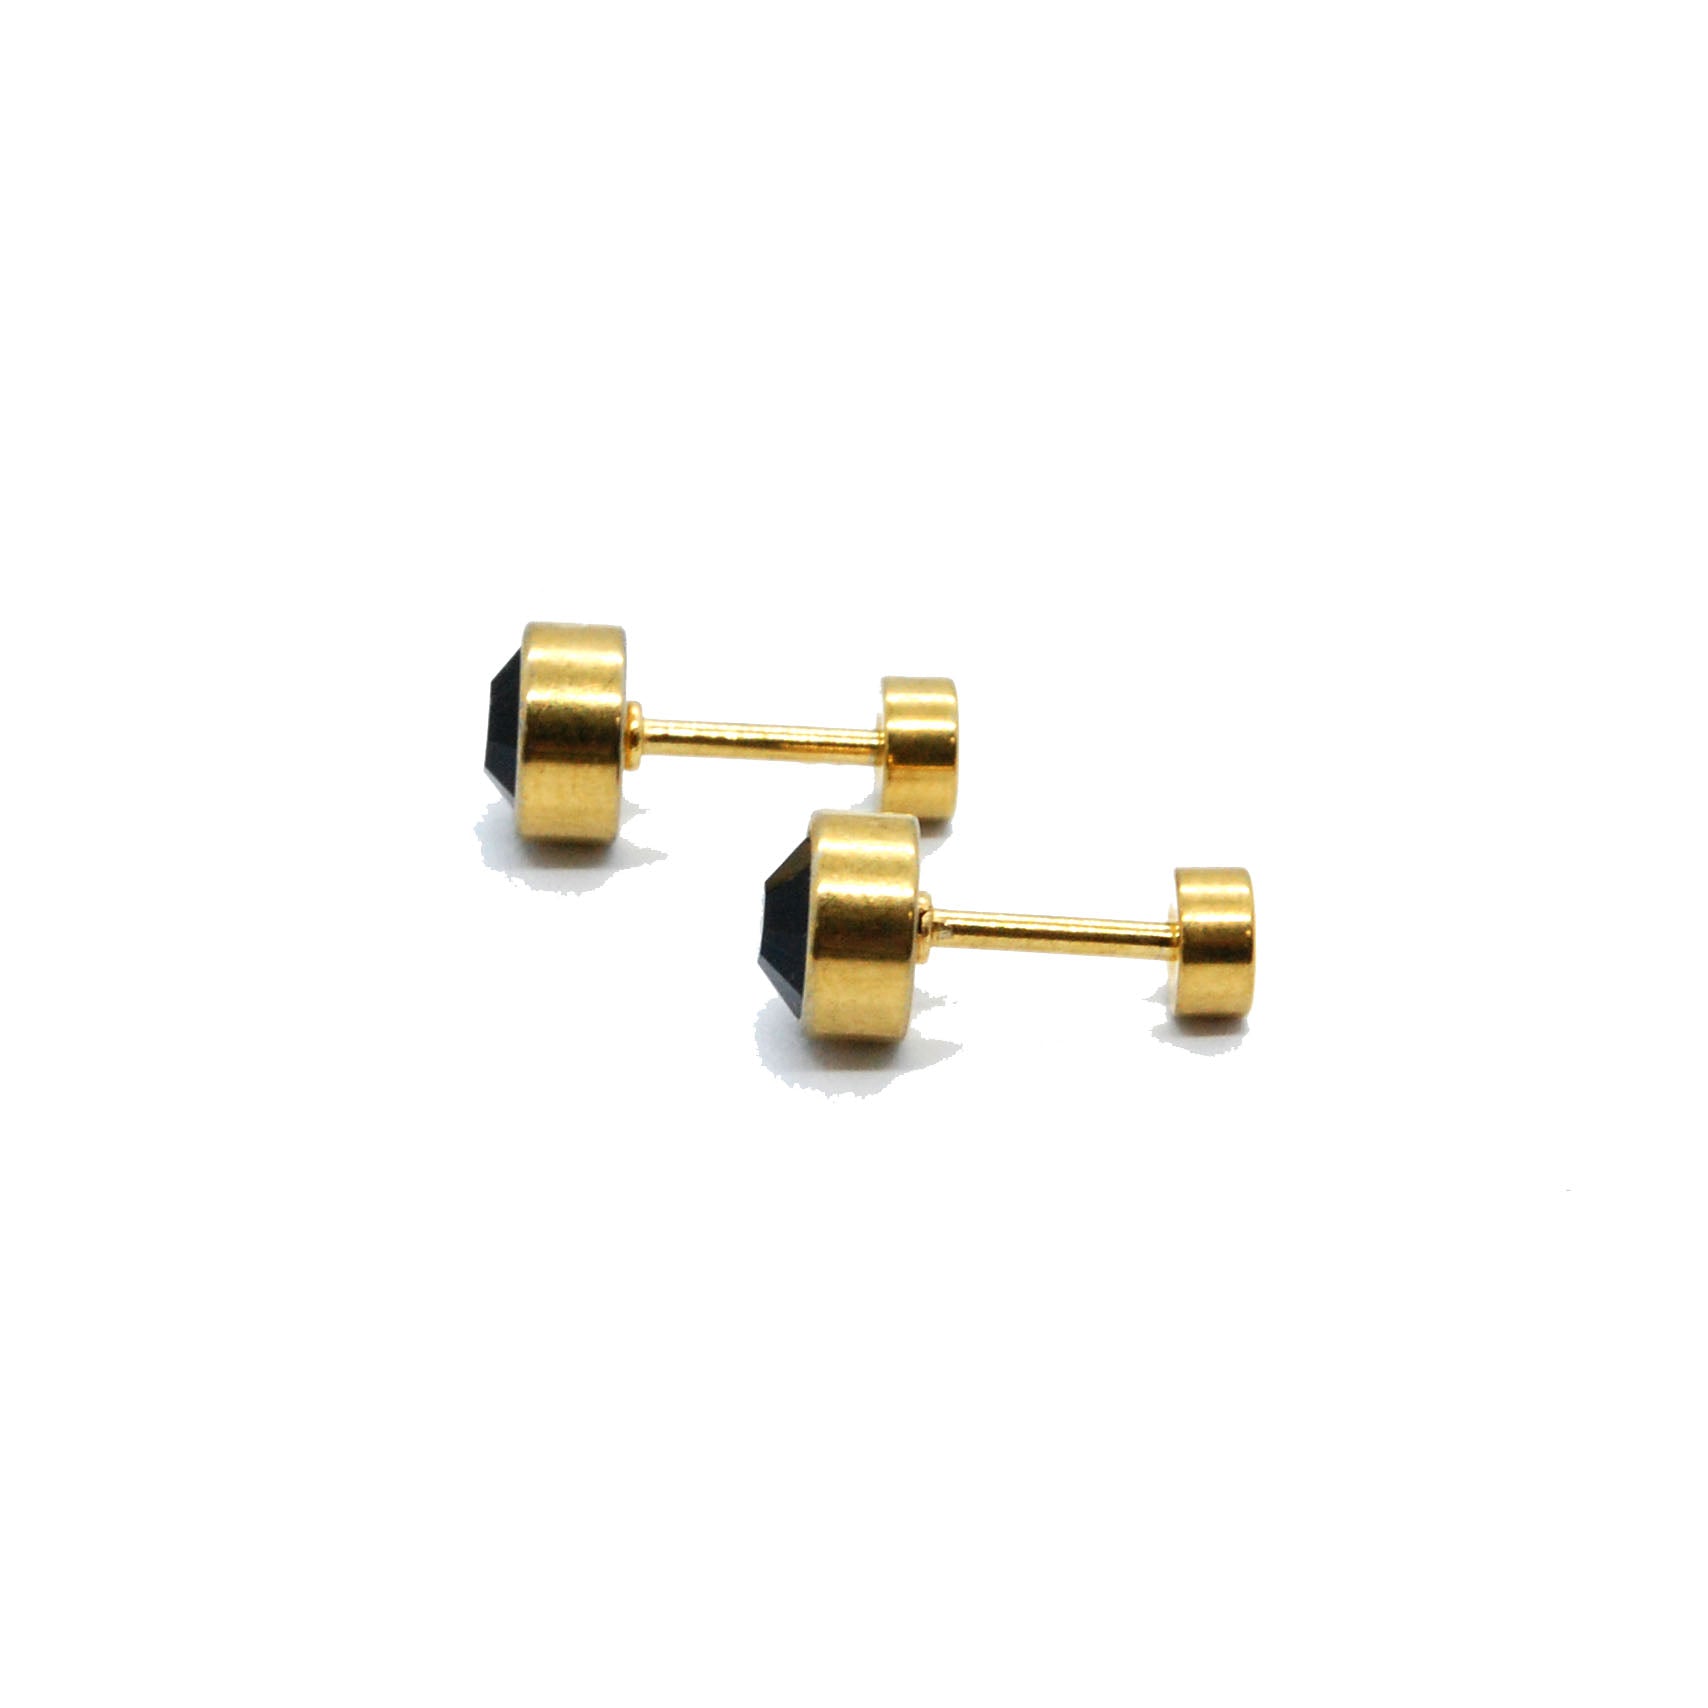 ESE 7669: Enclosed Gold Plated 6mm Black Cz Studs w/ Baby Safe Chapita